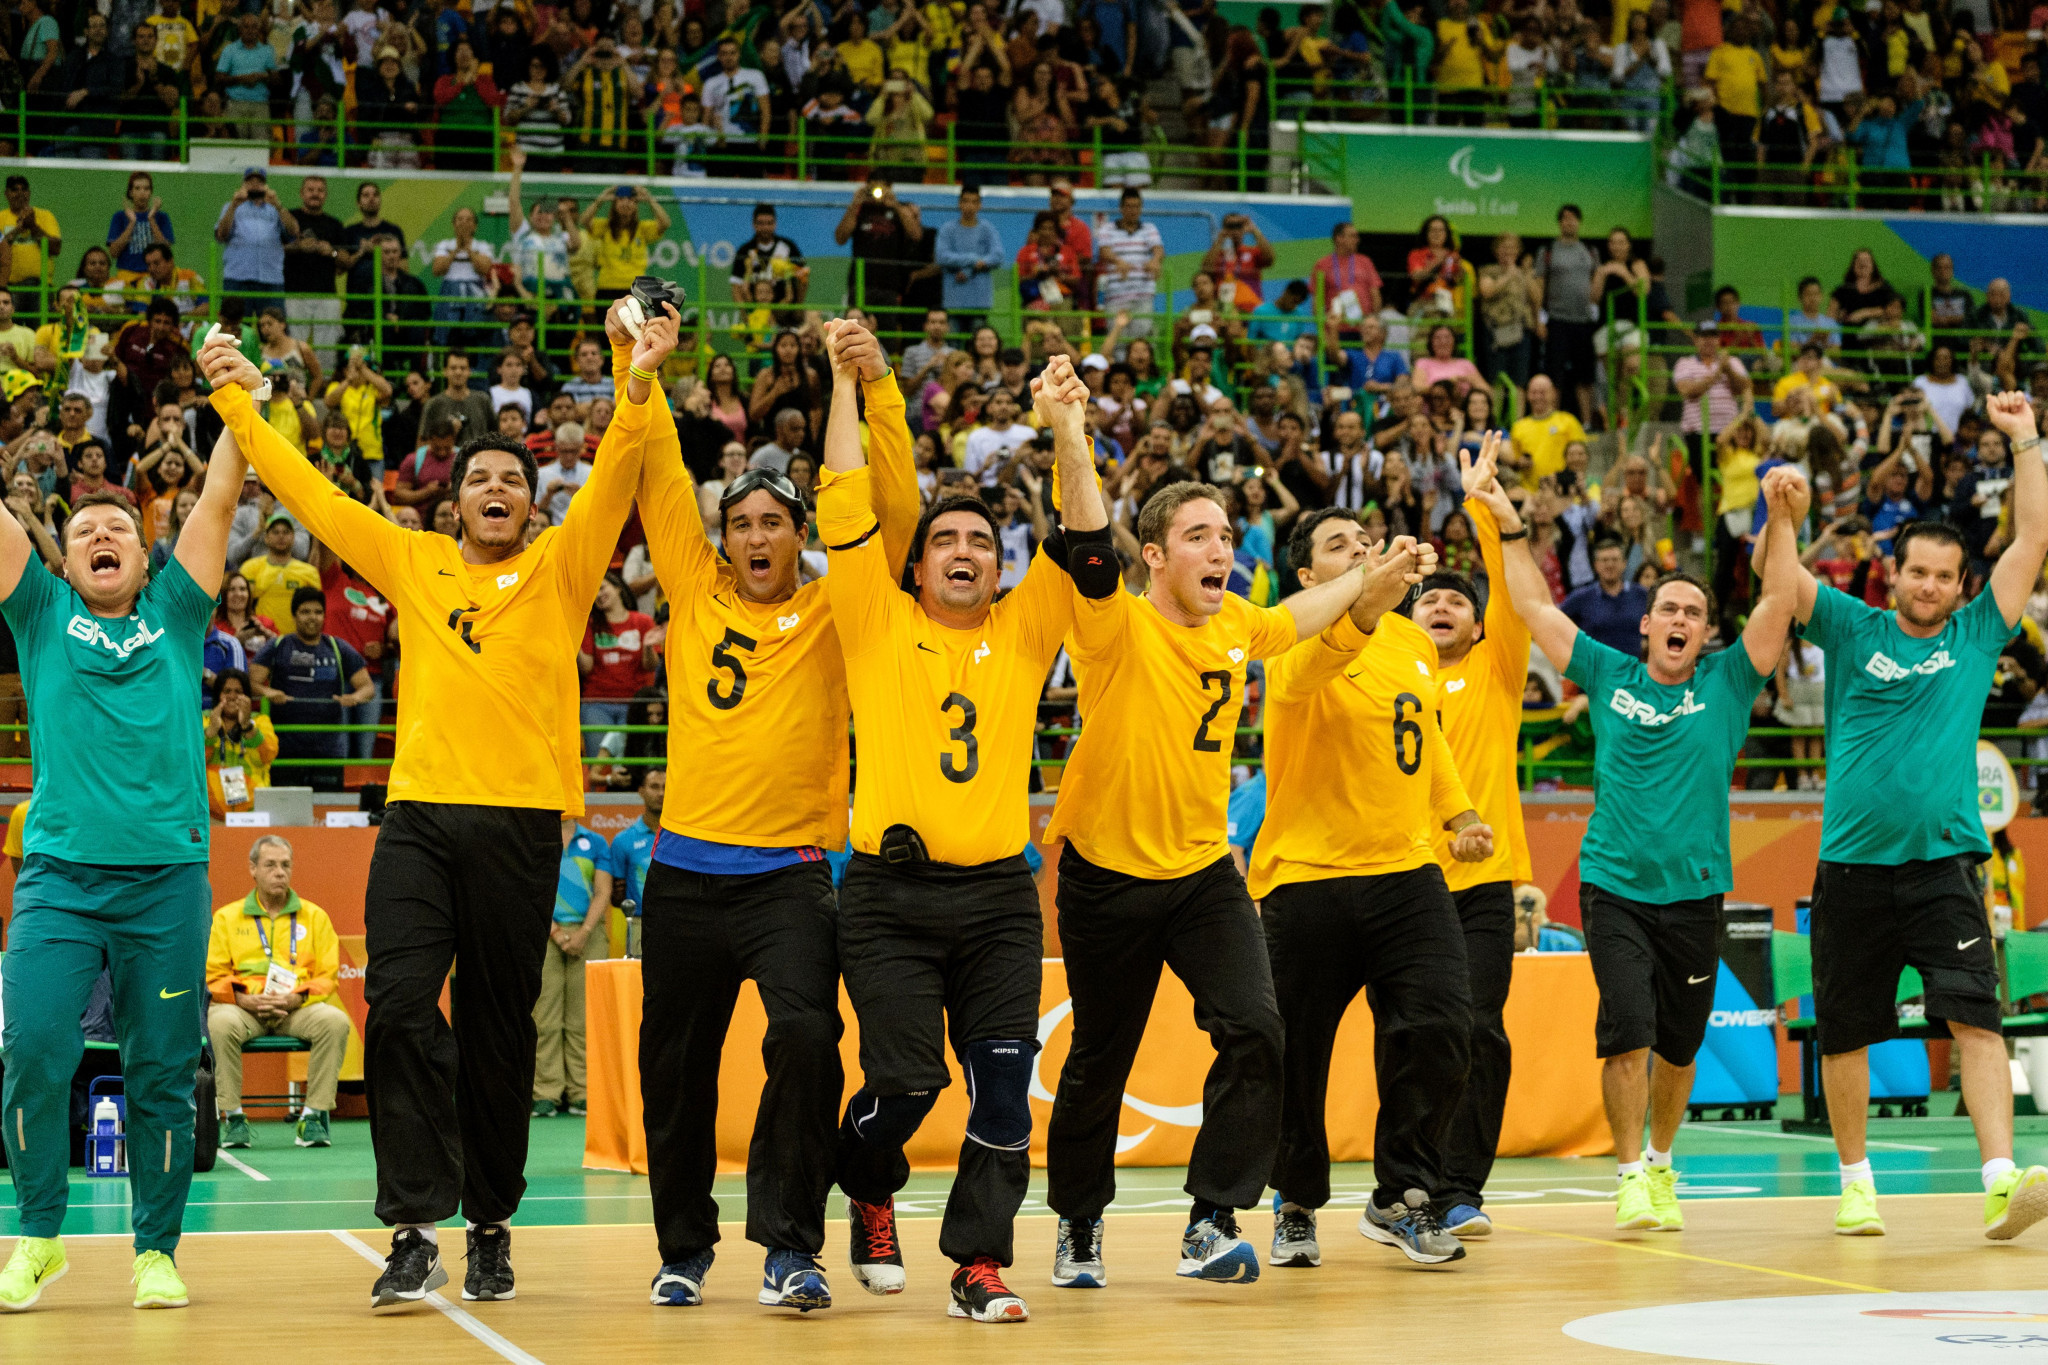 World champions Brazil are set to play Lithuania in the opening session ©Getty Images